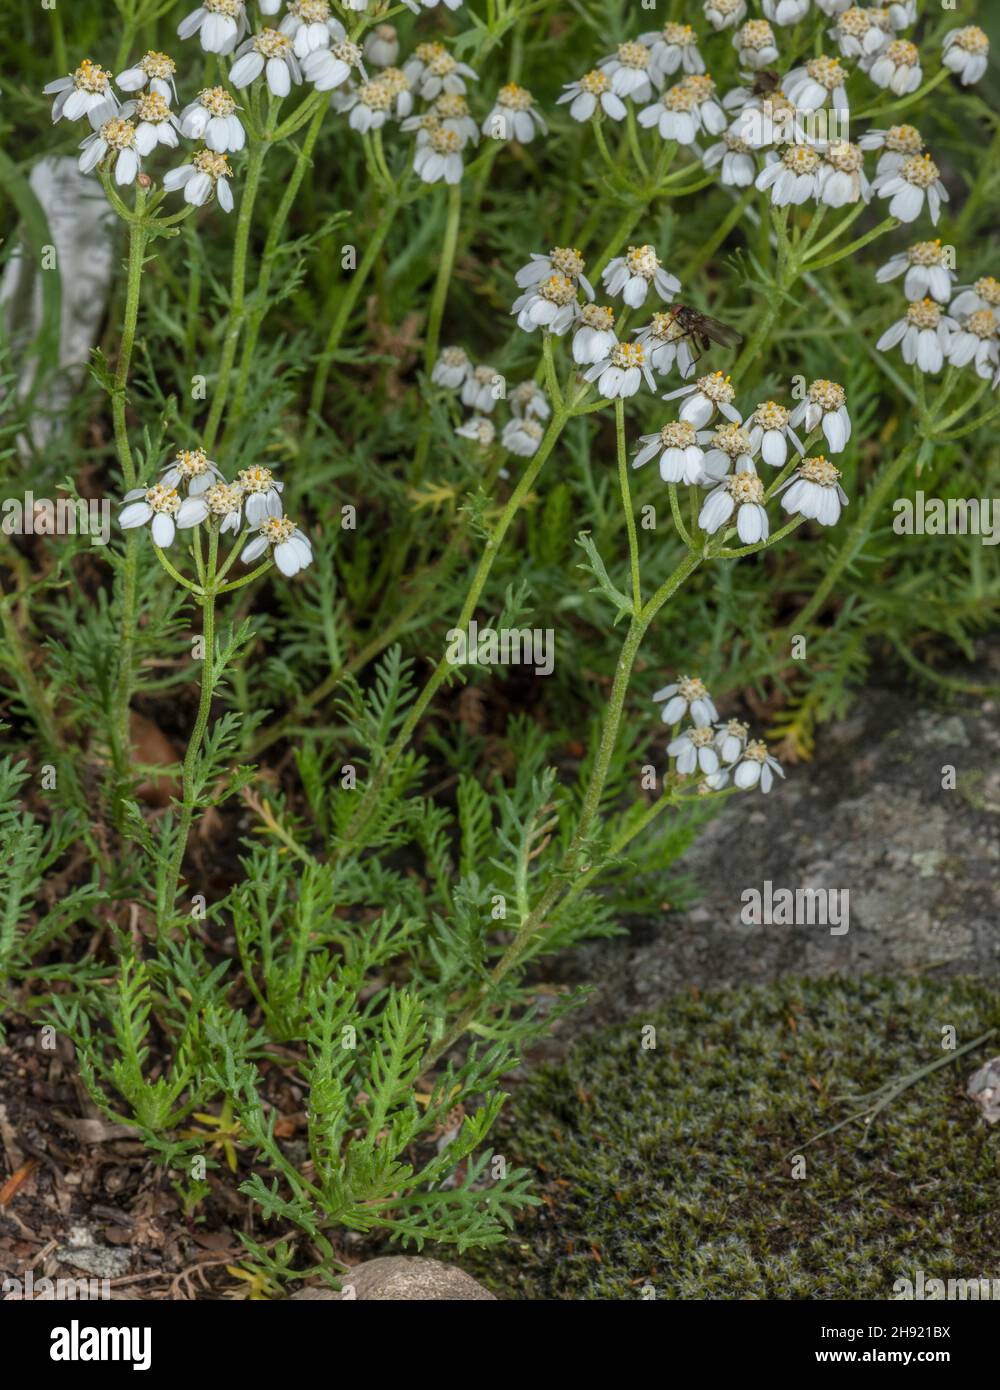 Simple leaved milfoil, Achillea erba-rotta ssp moschata in flower on rocky slope. Stock Photo